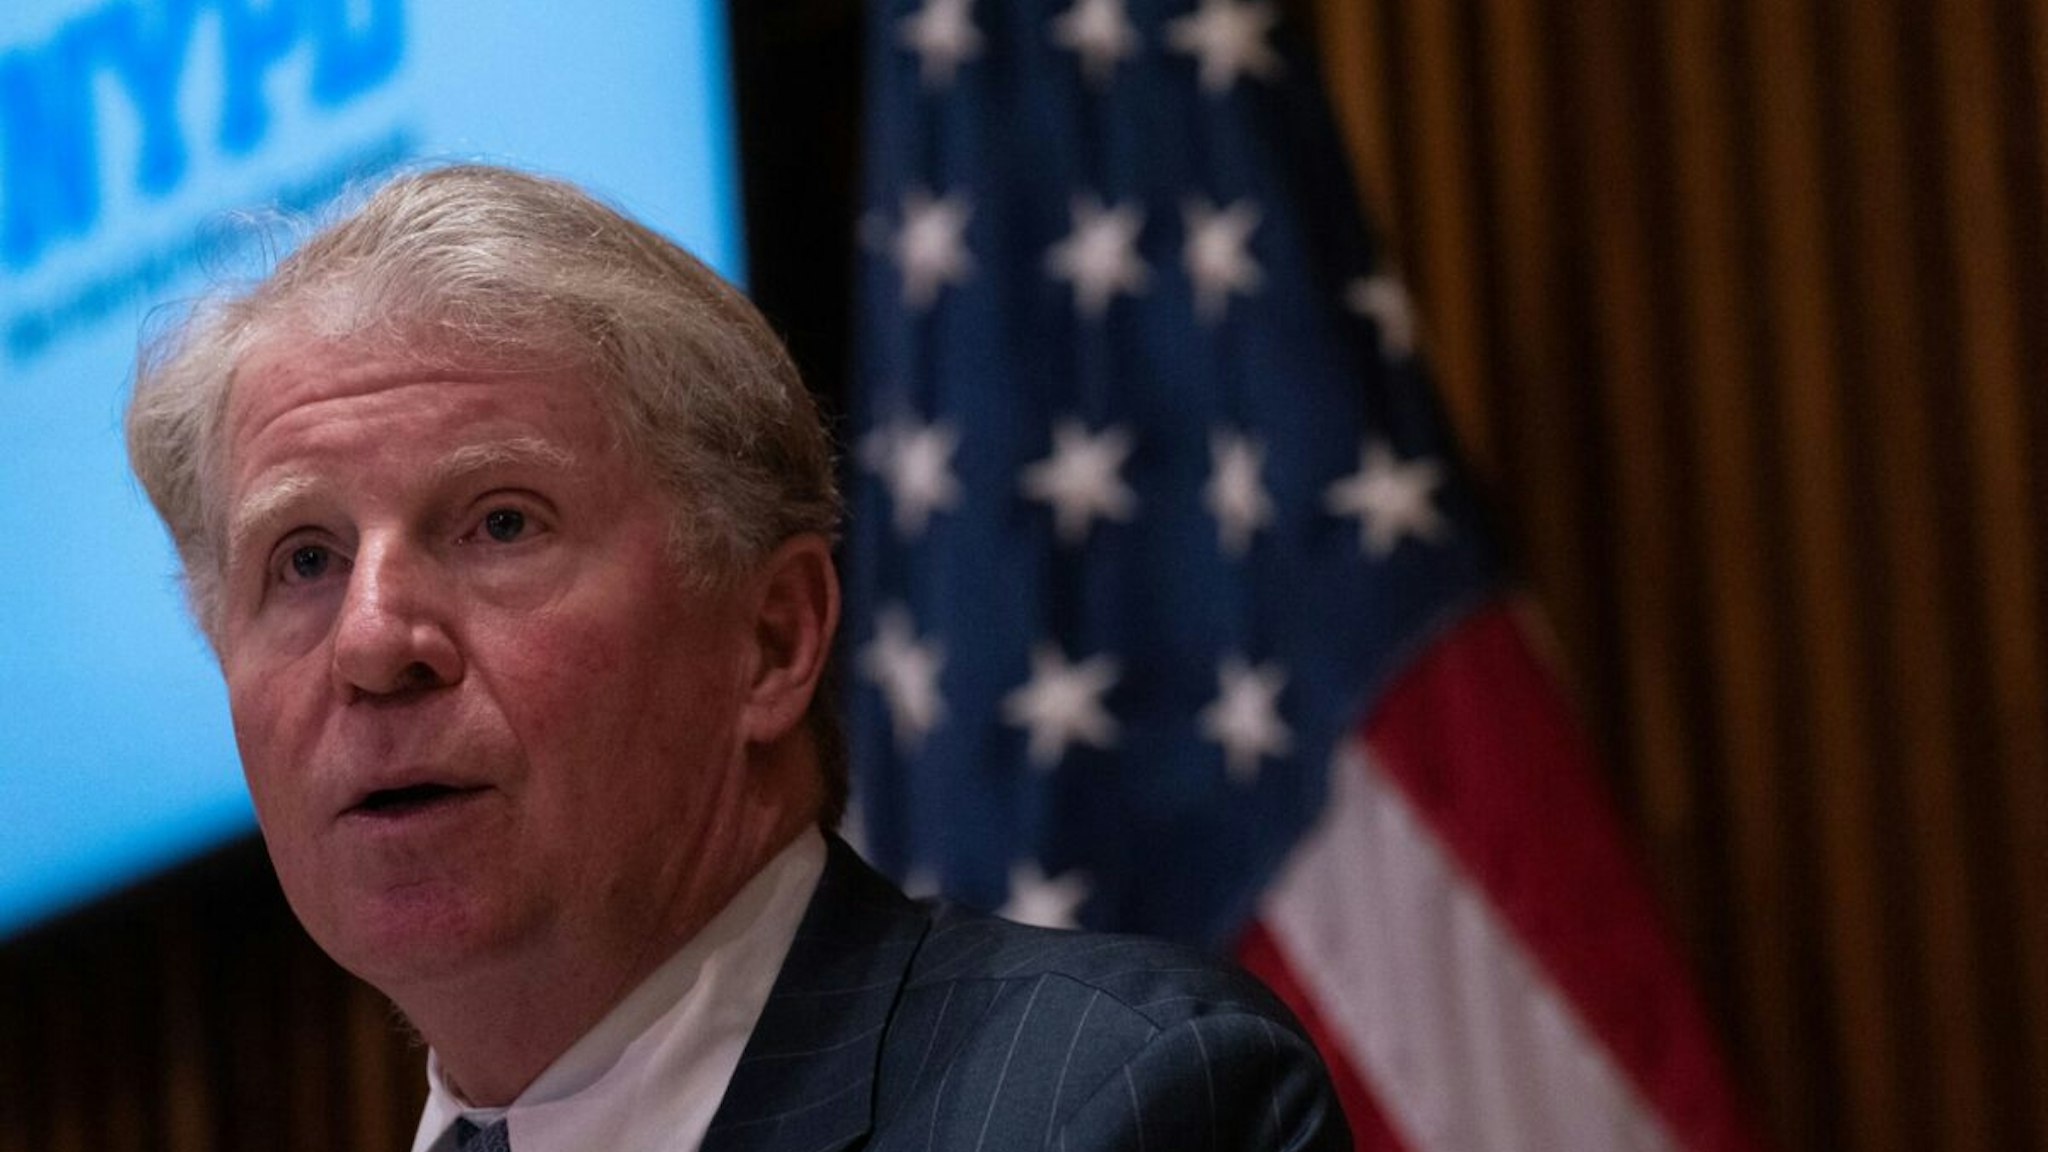 Manhattan District Attorney Cyrus Vance speaks during a press conference at 1 Police Plaza on October 5, 2021 in New York.